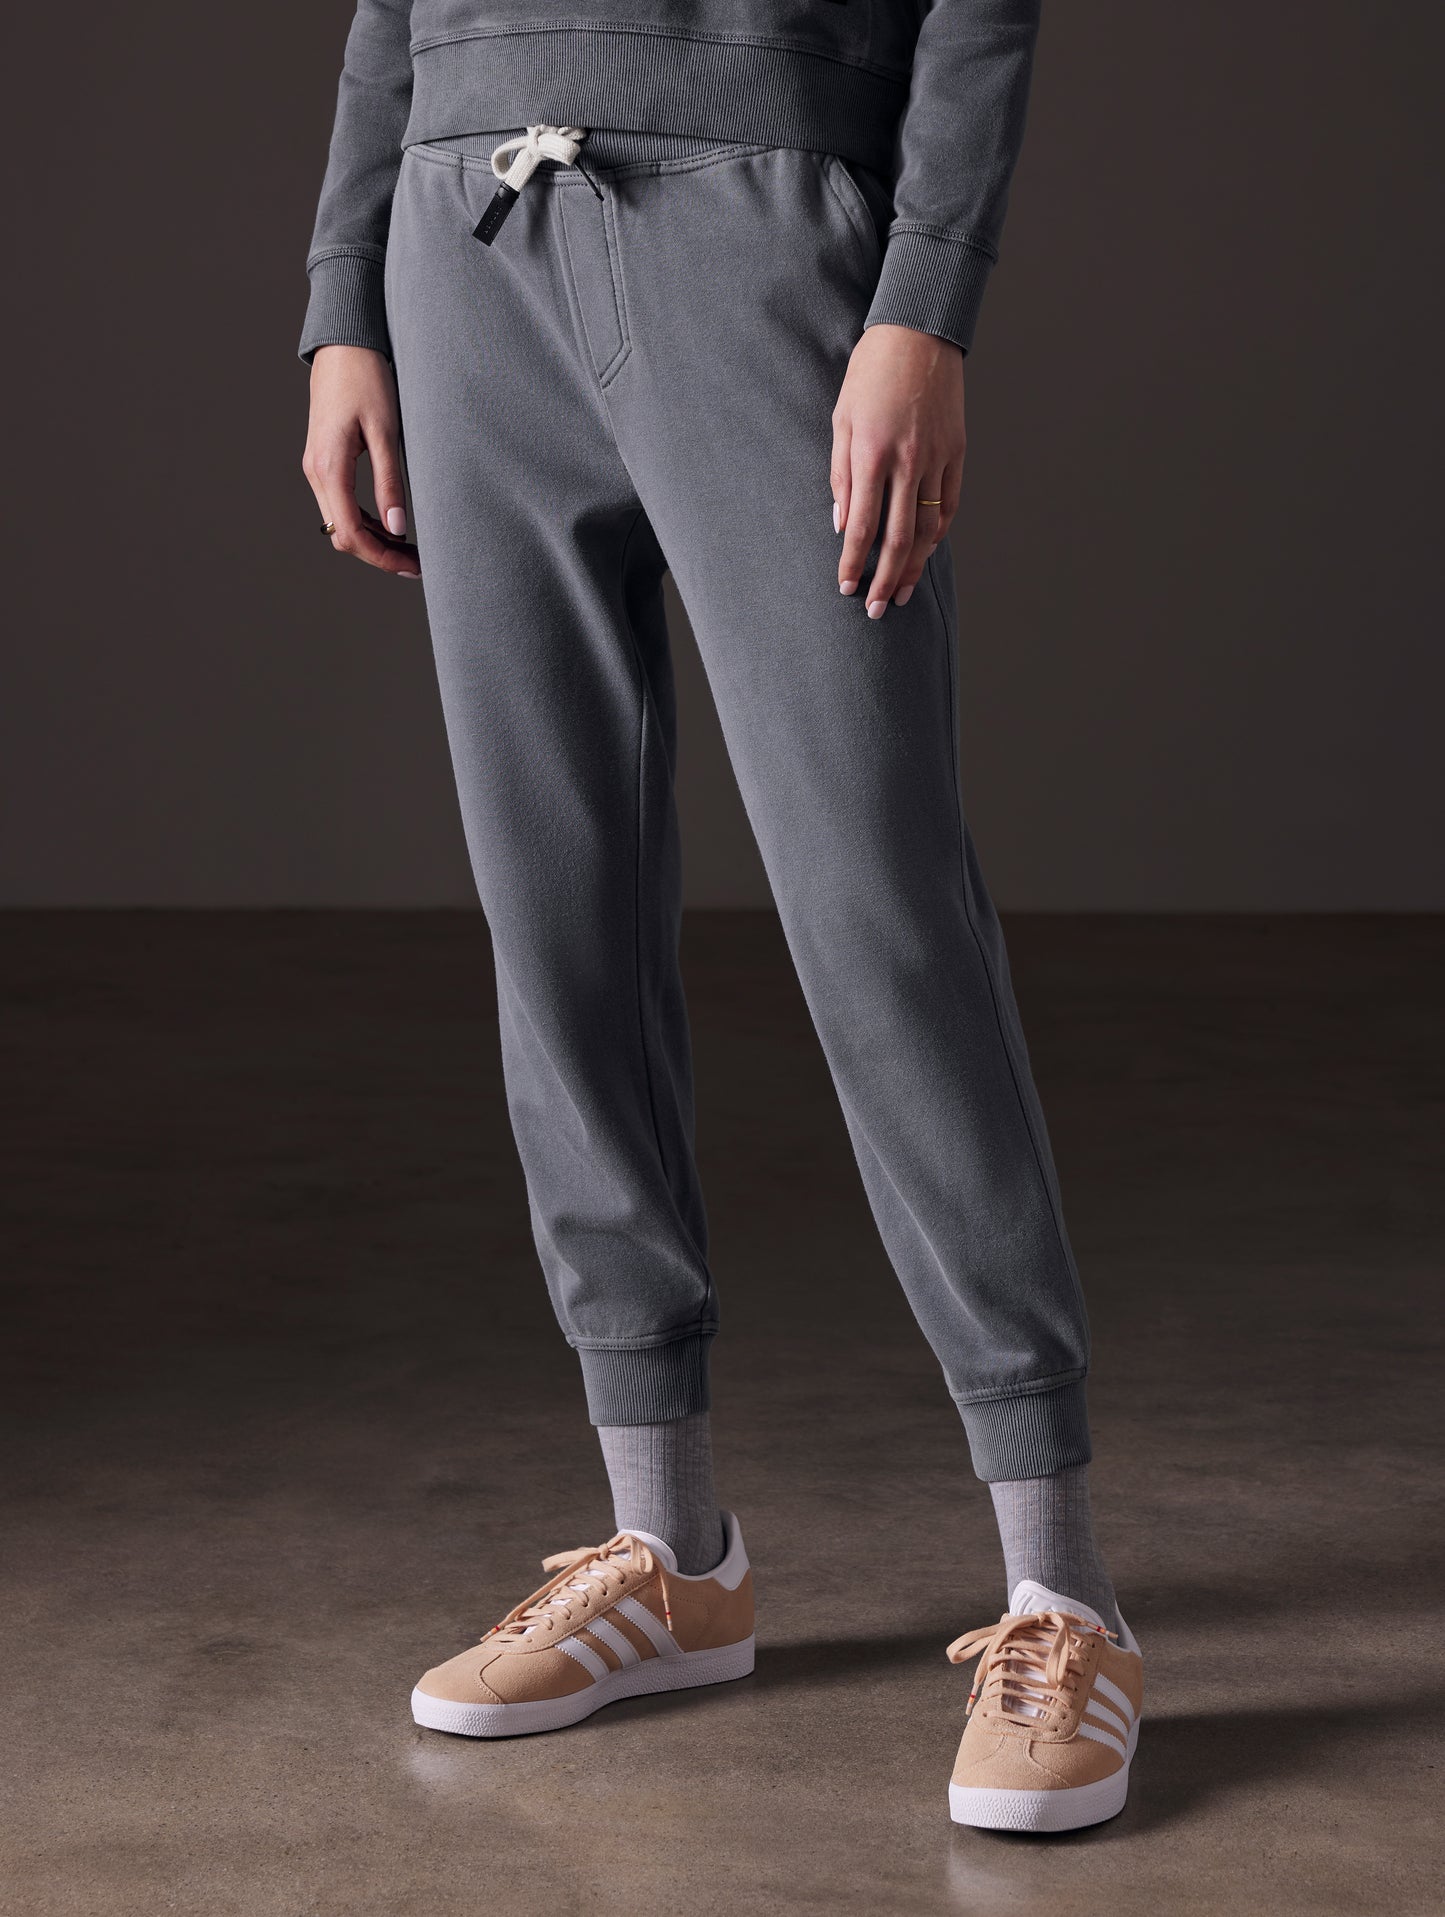 grey jogger for women from AETHER Apparel